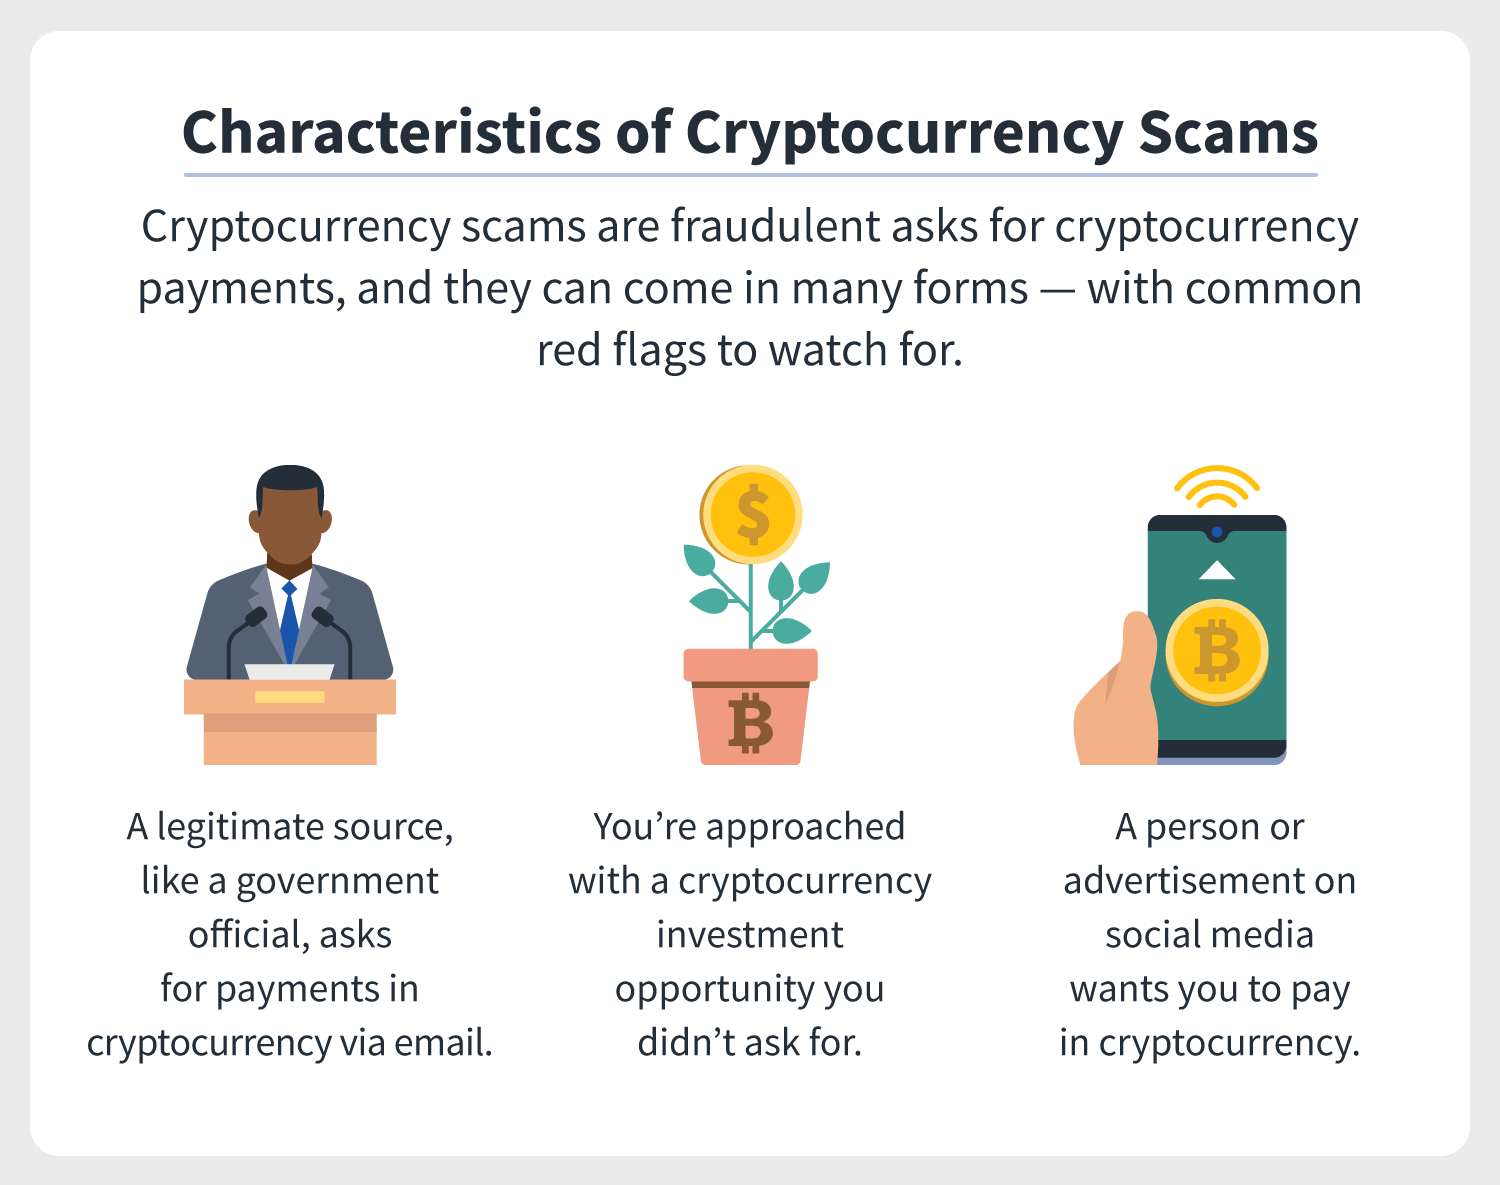 three illustrations highlight some common characteristics of cryptocurrency scams, with the main one being unsolicited asks to be paid in cryptocurrency